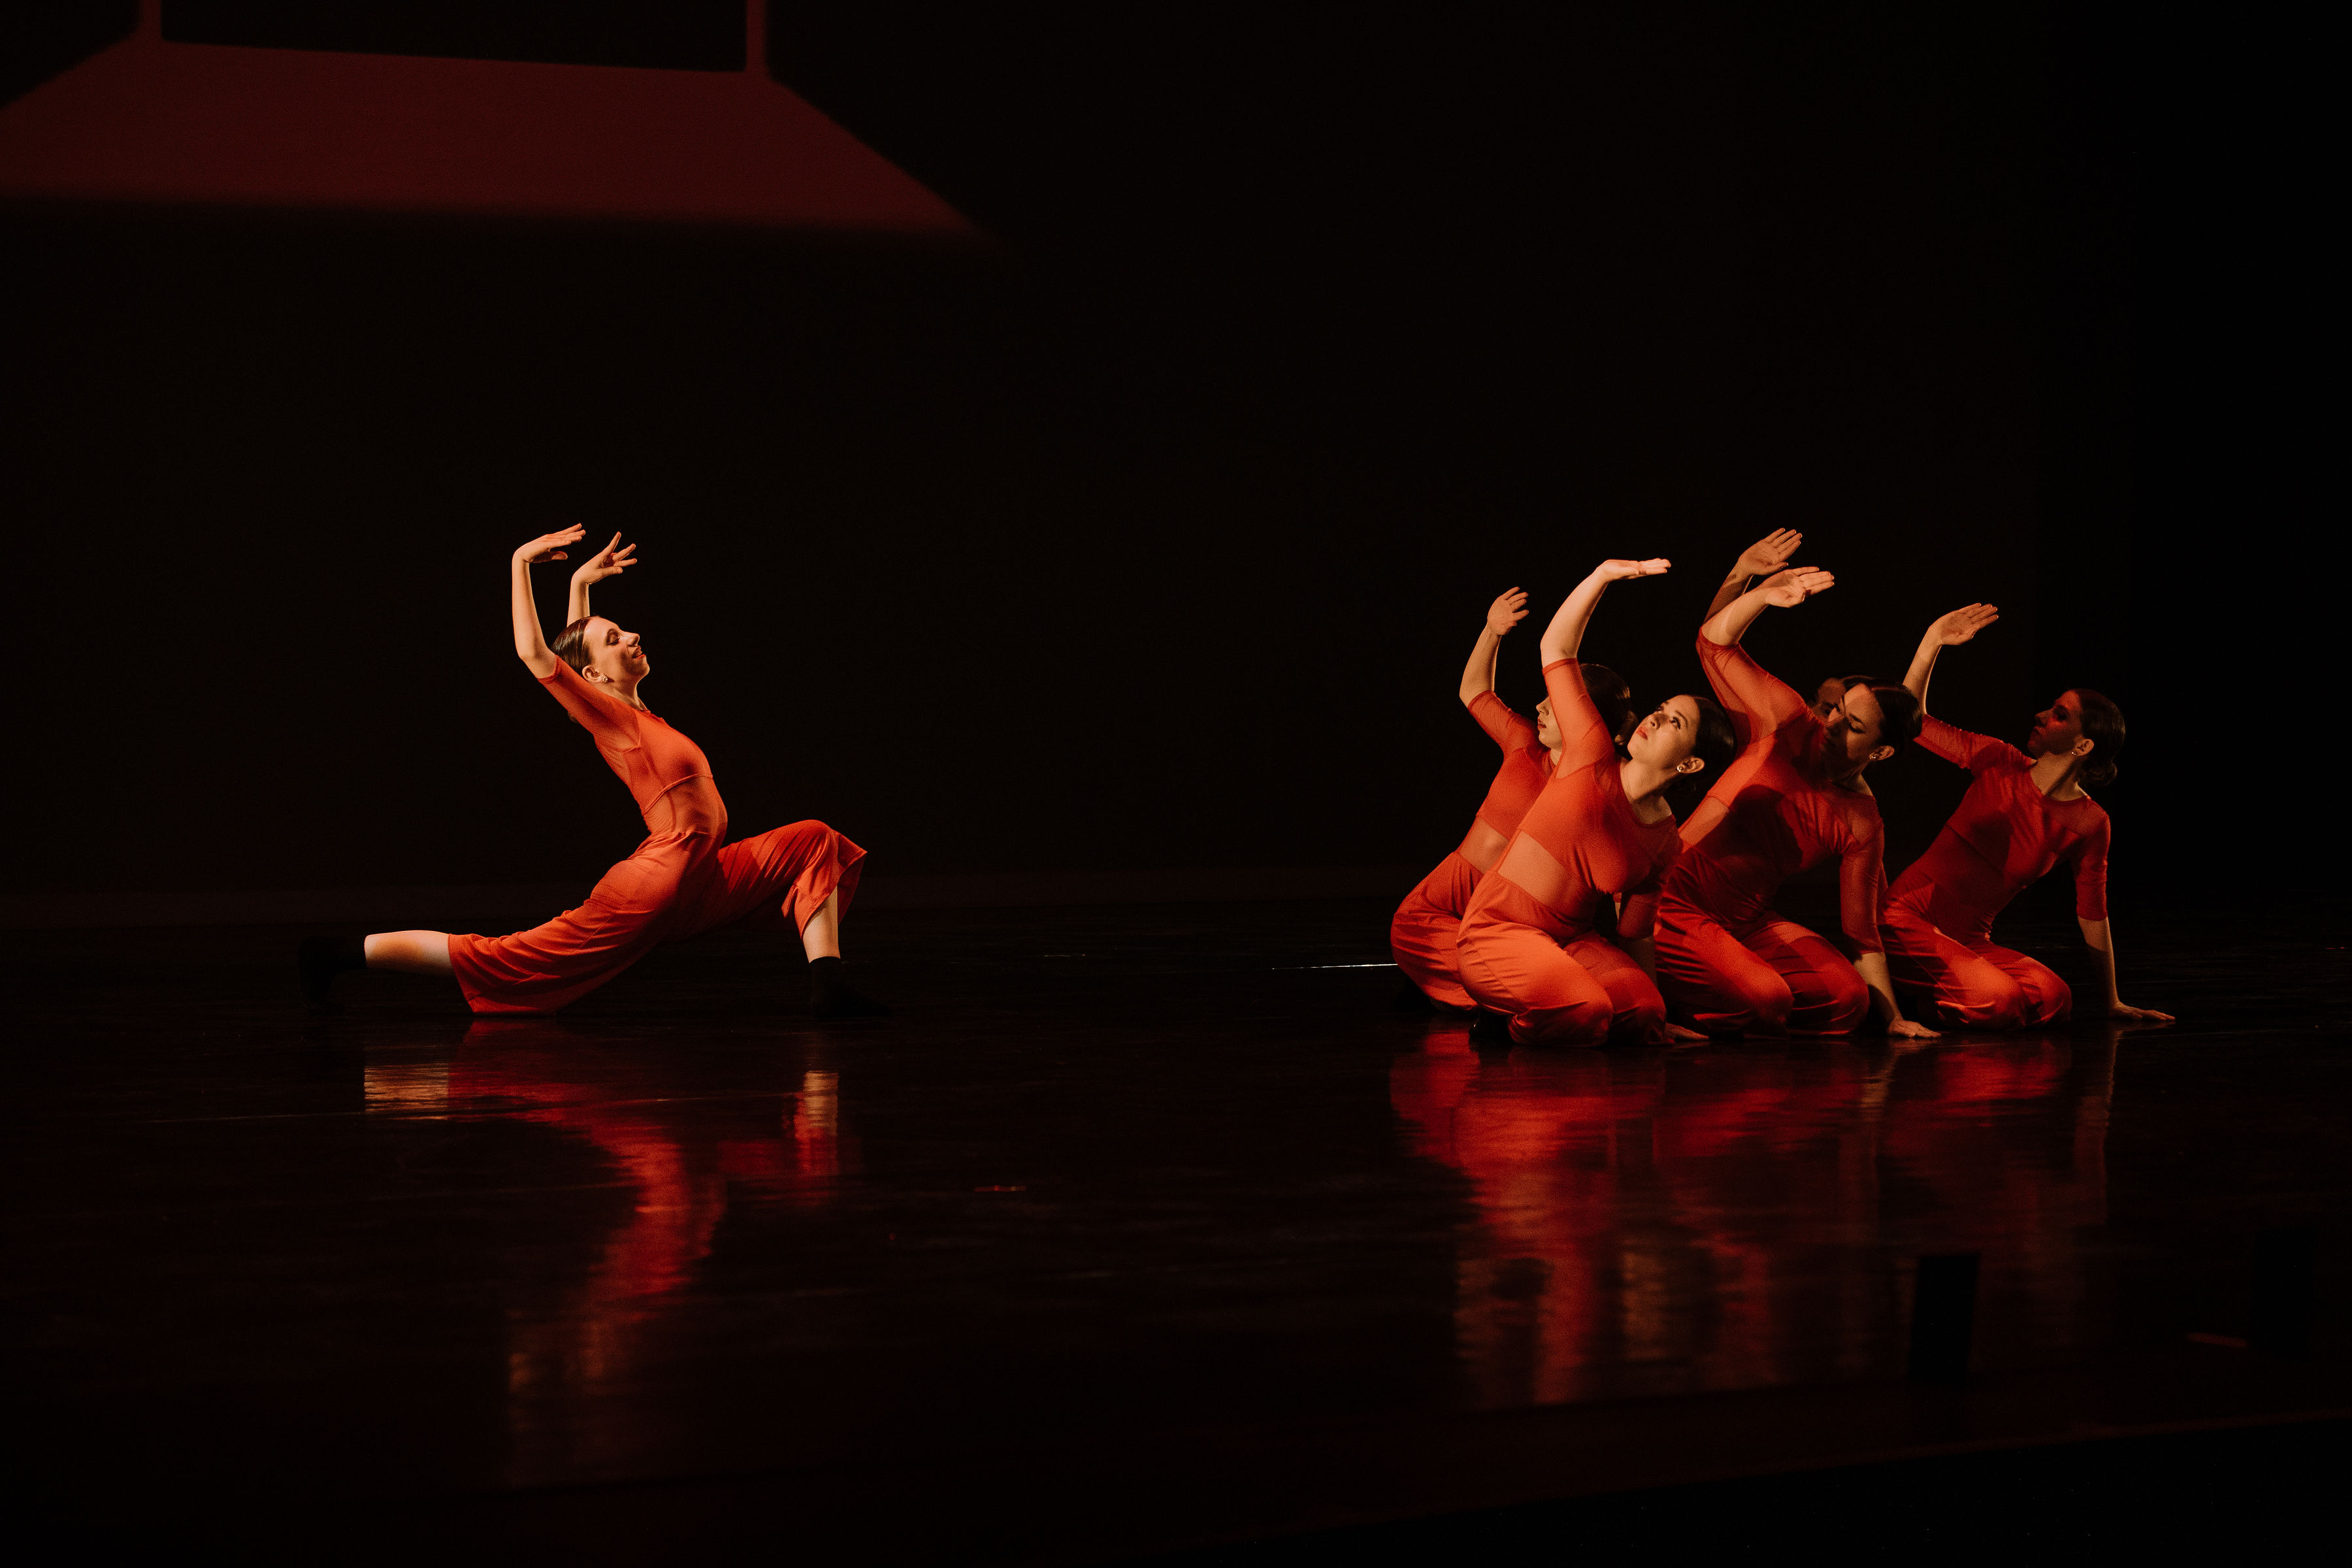 Contemporary dancers performing in all red costumes on stage